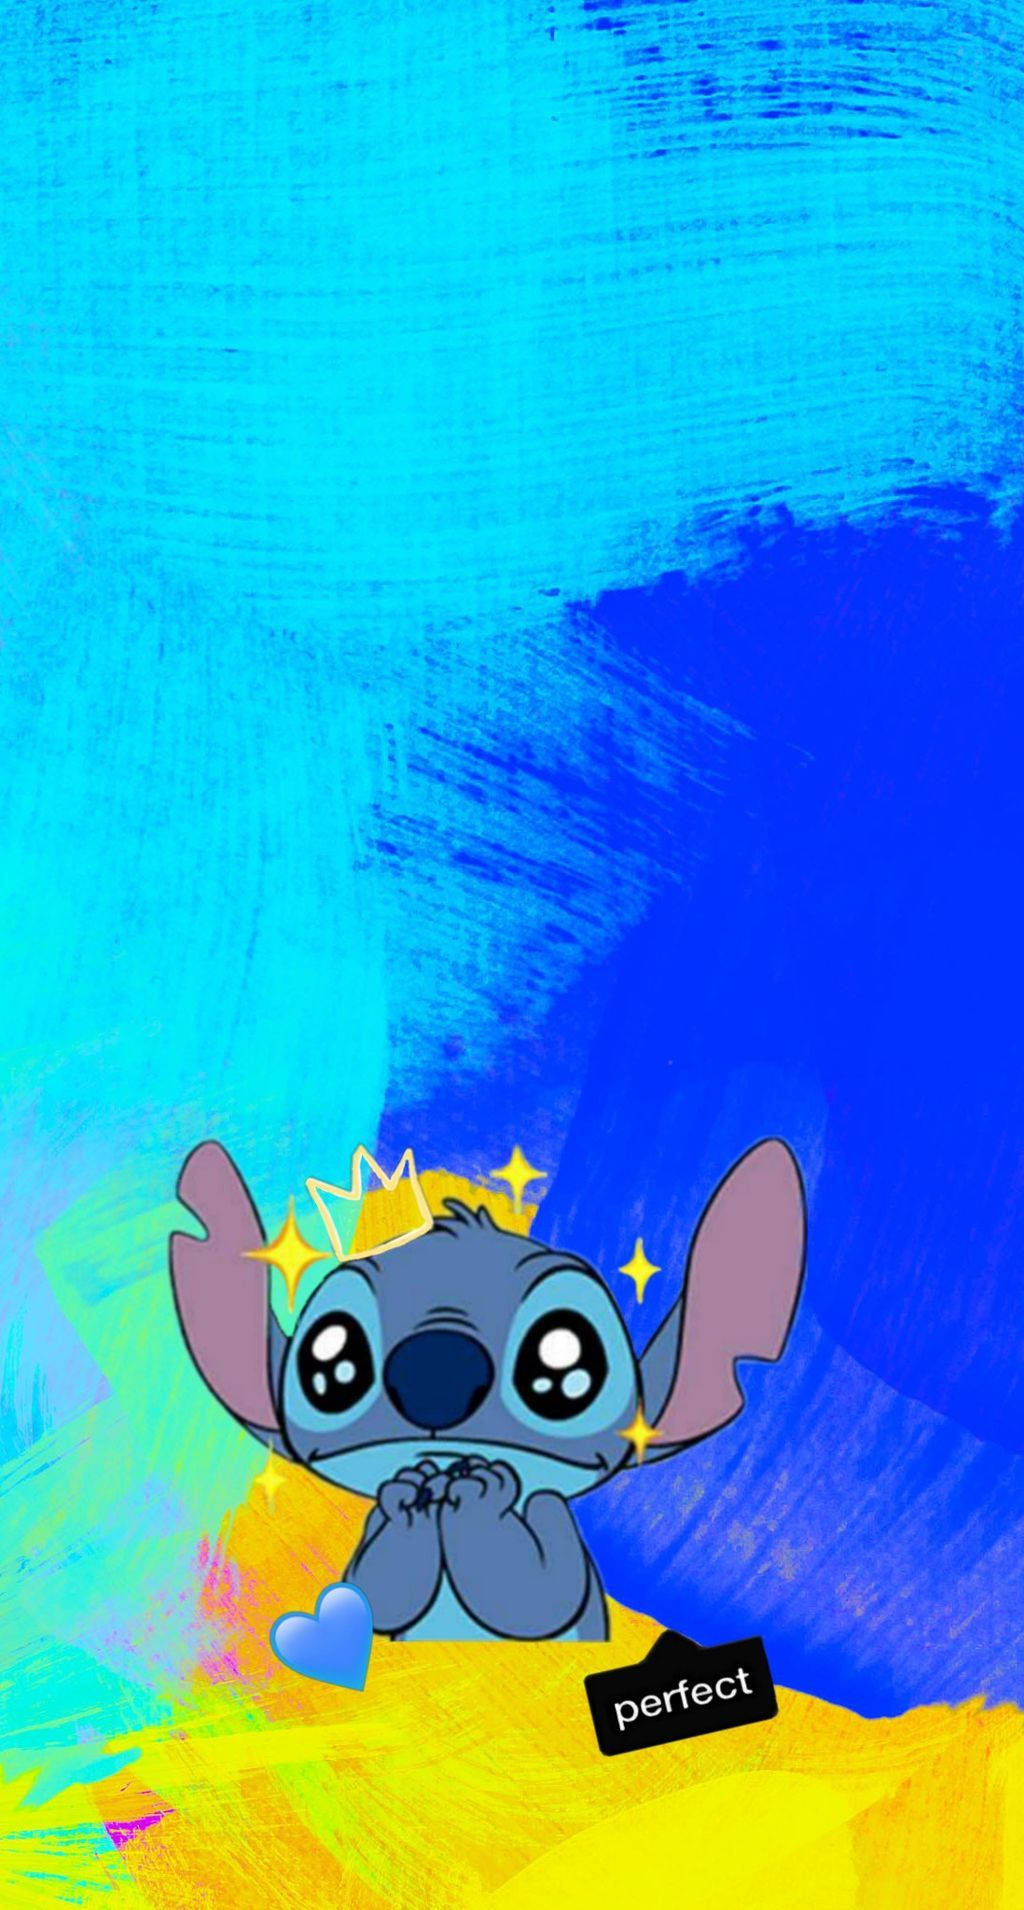 Cute Aesthetic Stitch Looking Adorable